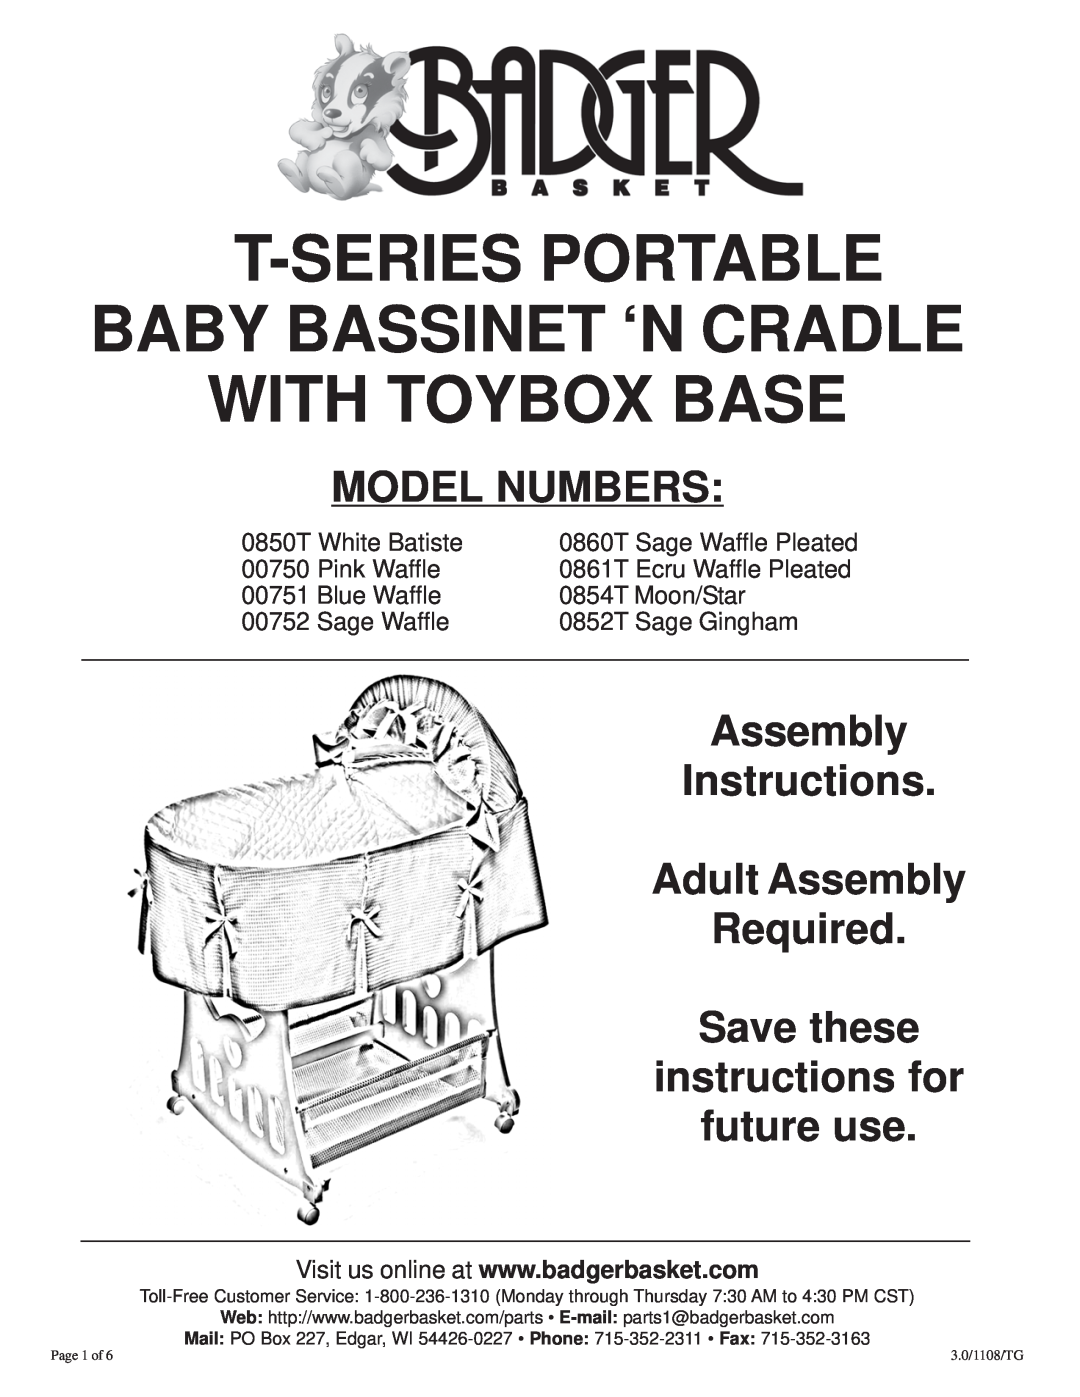 Badger Basket 0854T, 0861T, 0860T, 0850T manual Model Numbers, Assembly Instructions Adult Assembly Required Save these 